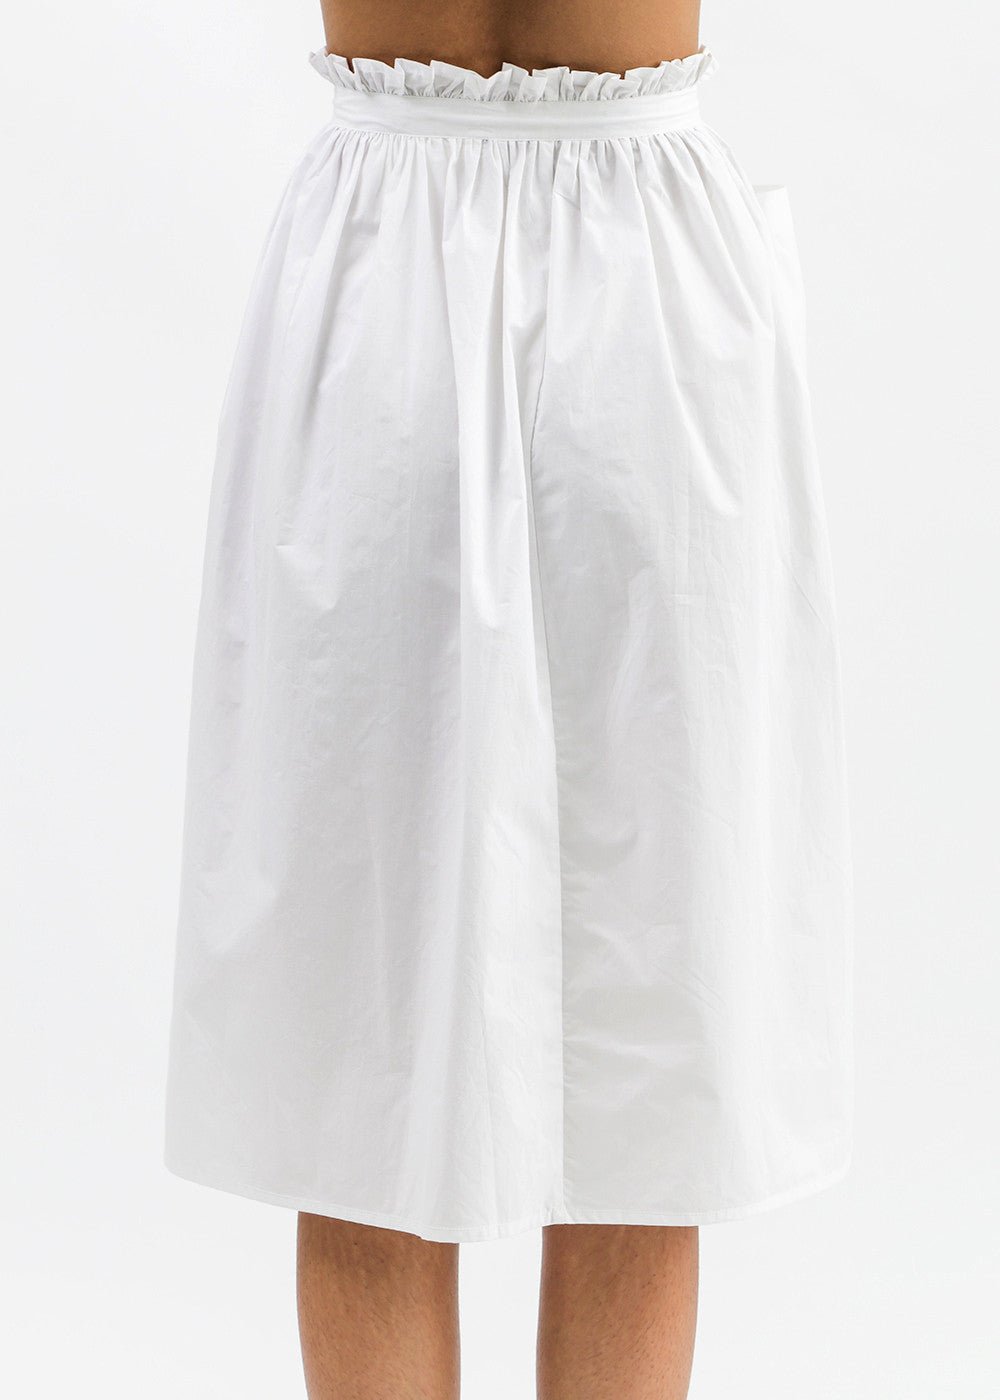 WRAY Town Skirt - New Classics Studios Sustainable Ethical Fashion Canada